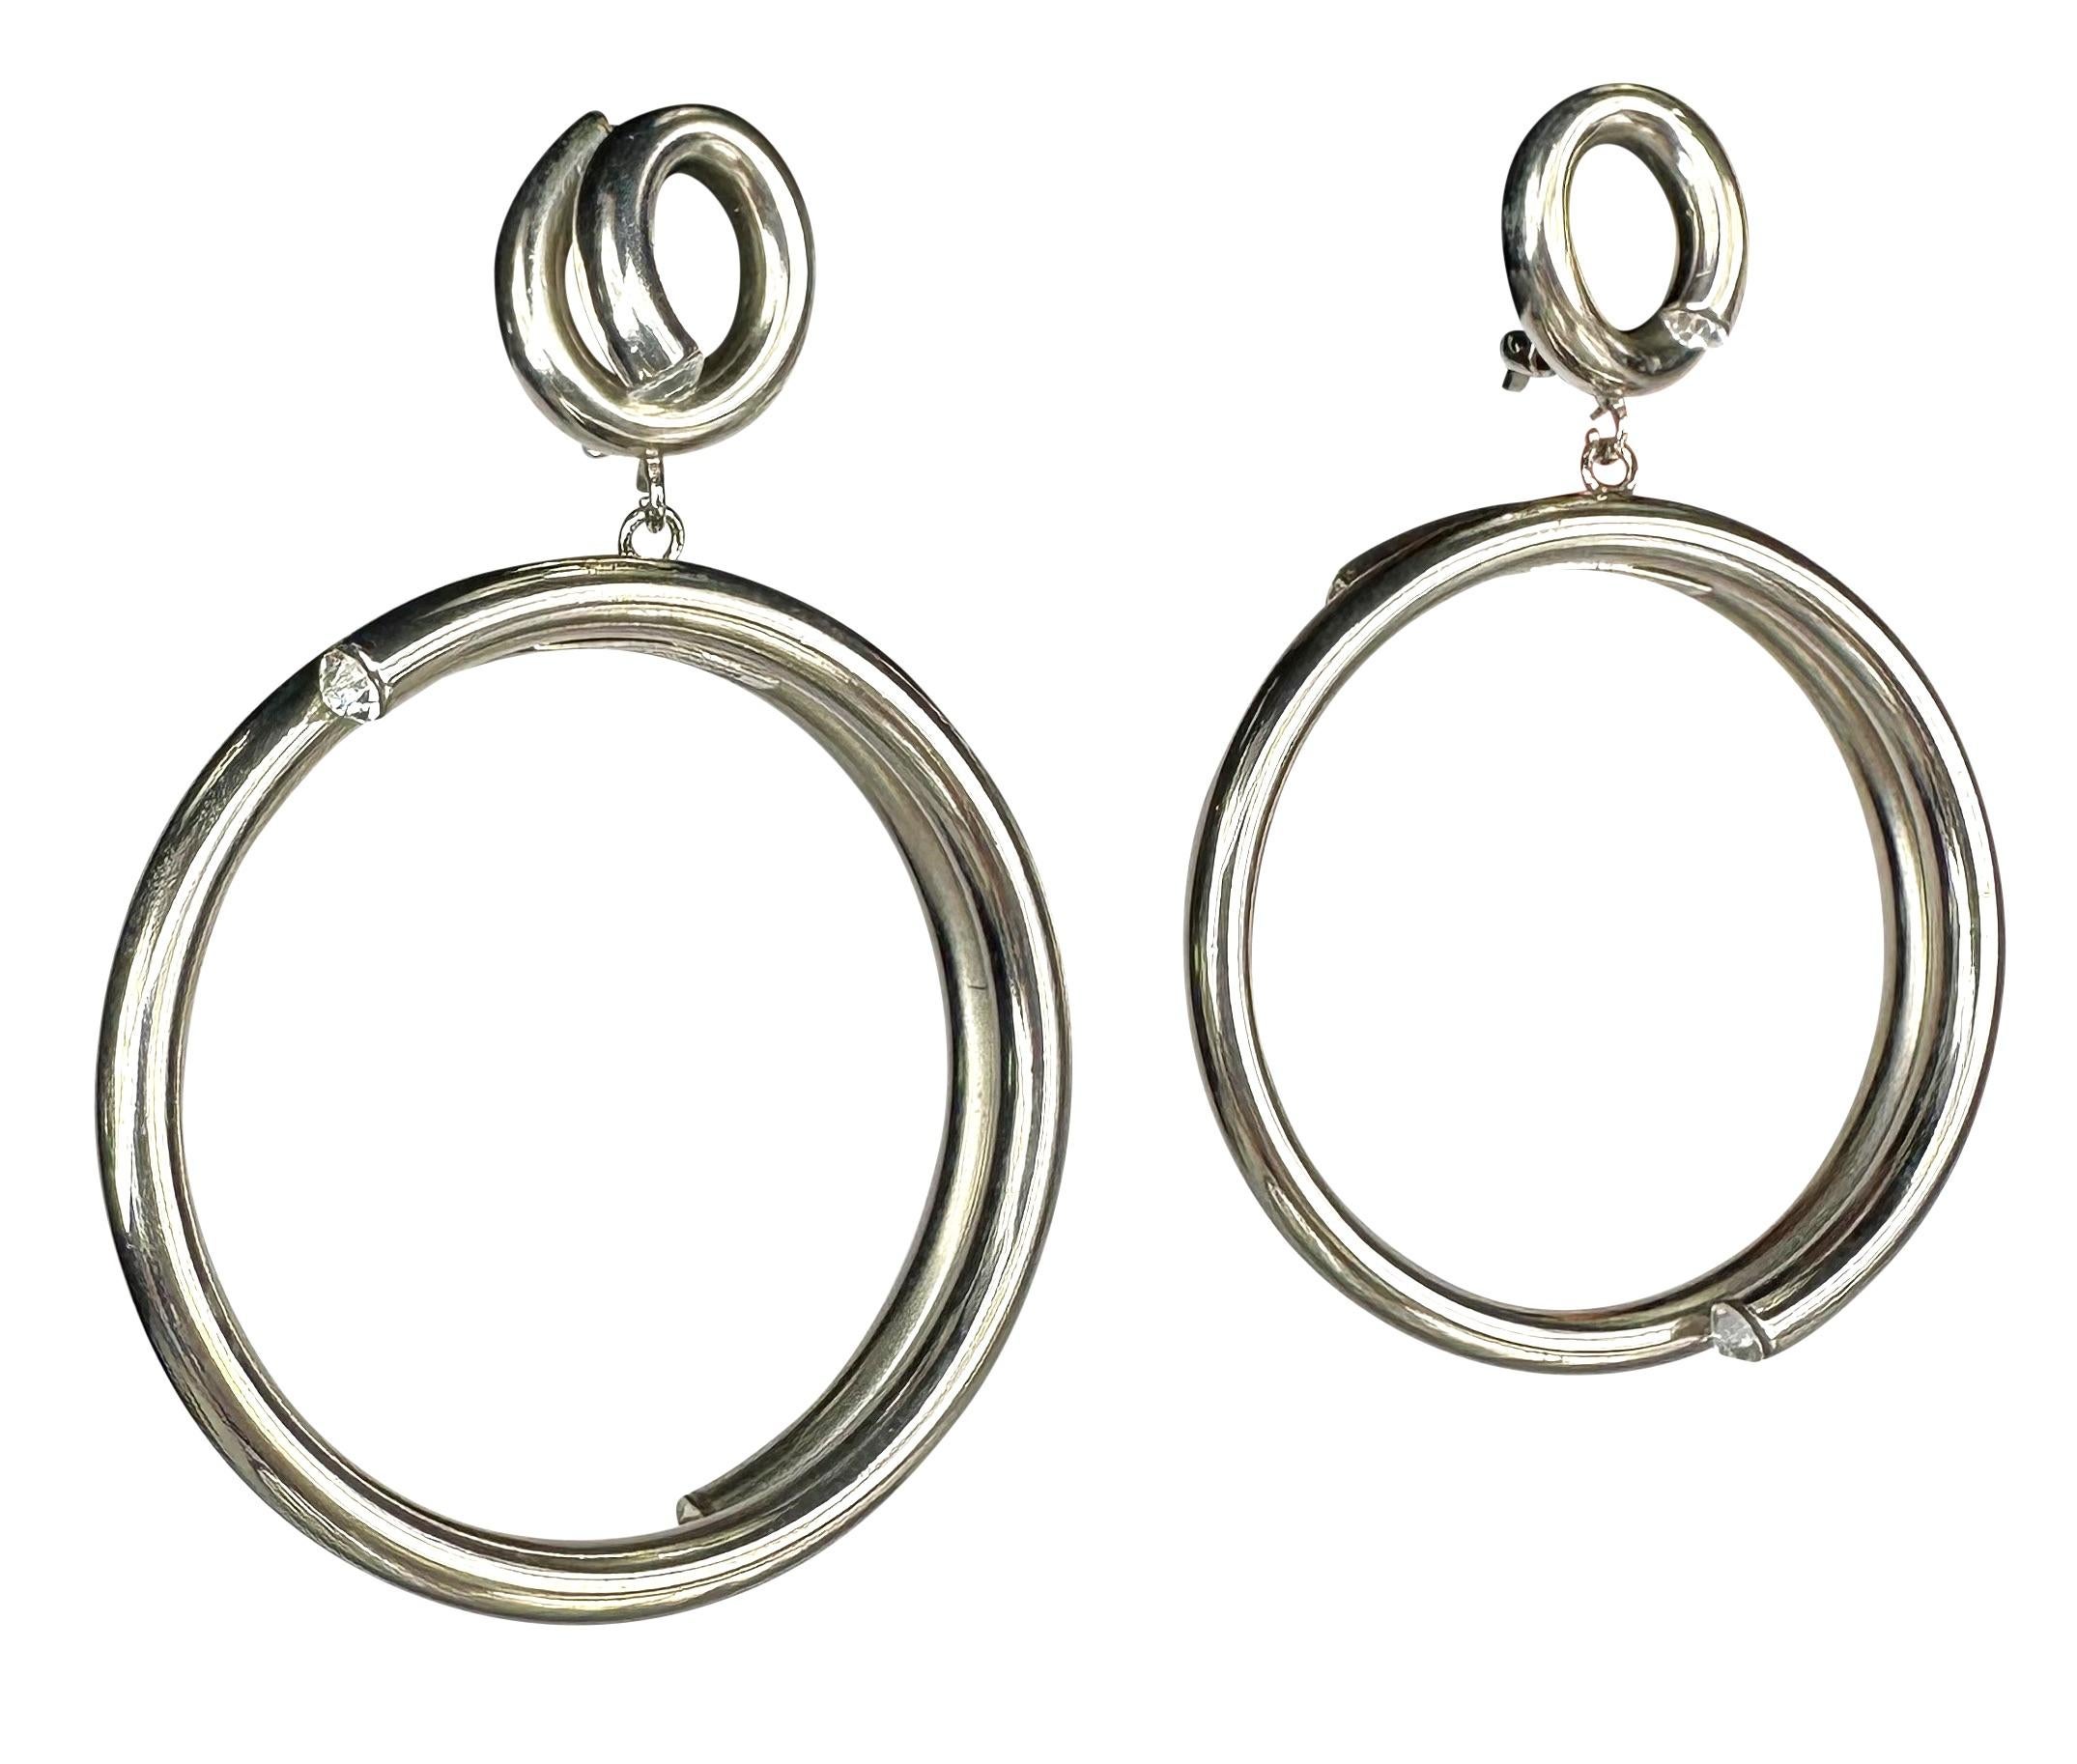 Presenting a pair of silvertone Gianni Versace costume hoop clip-on earrings. From the 1980s, these fabulous earrings feature a circular coil drop accented with rhinestones at each end. A rare find from the early days of Gianni Versace, these modern